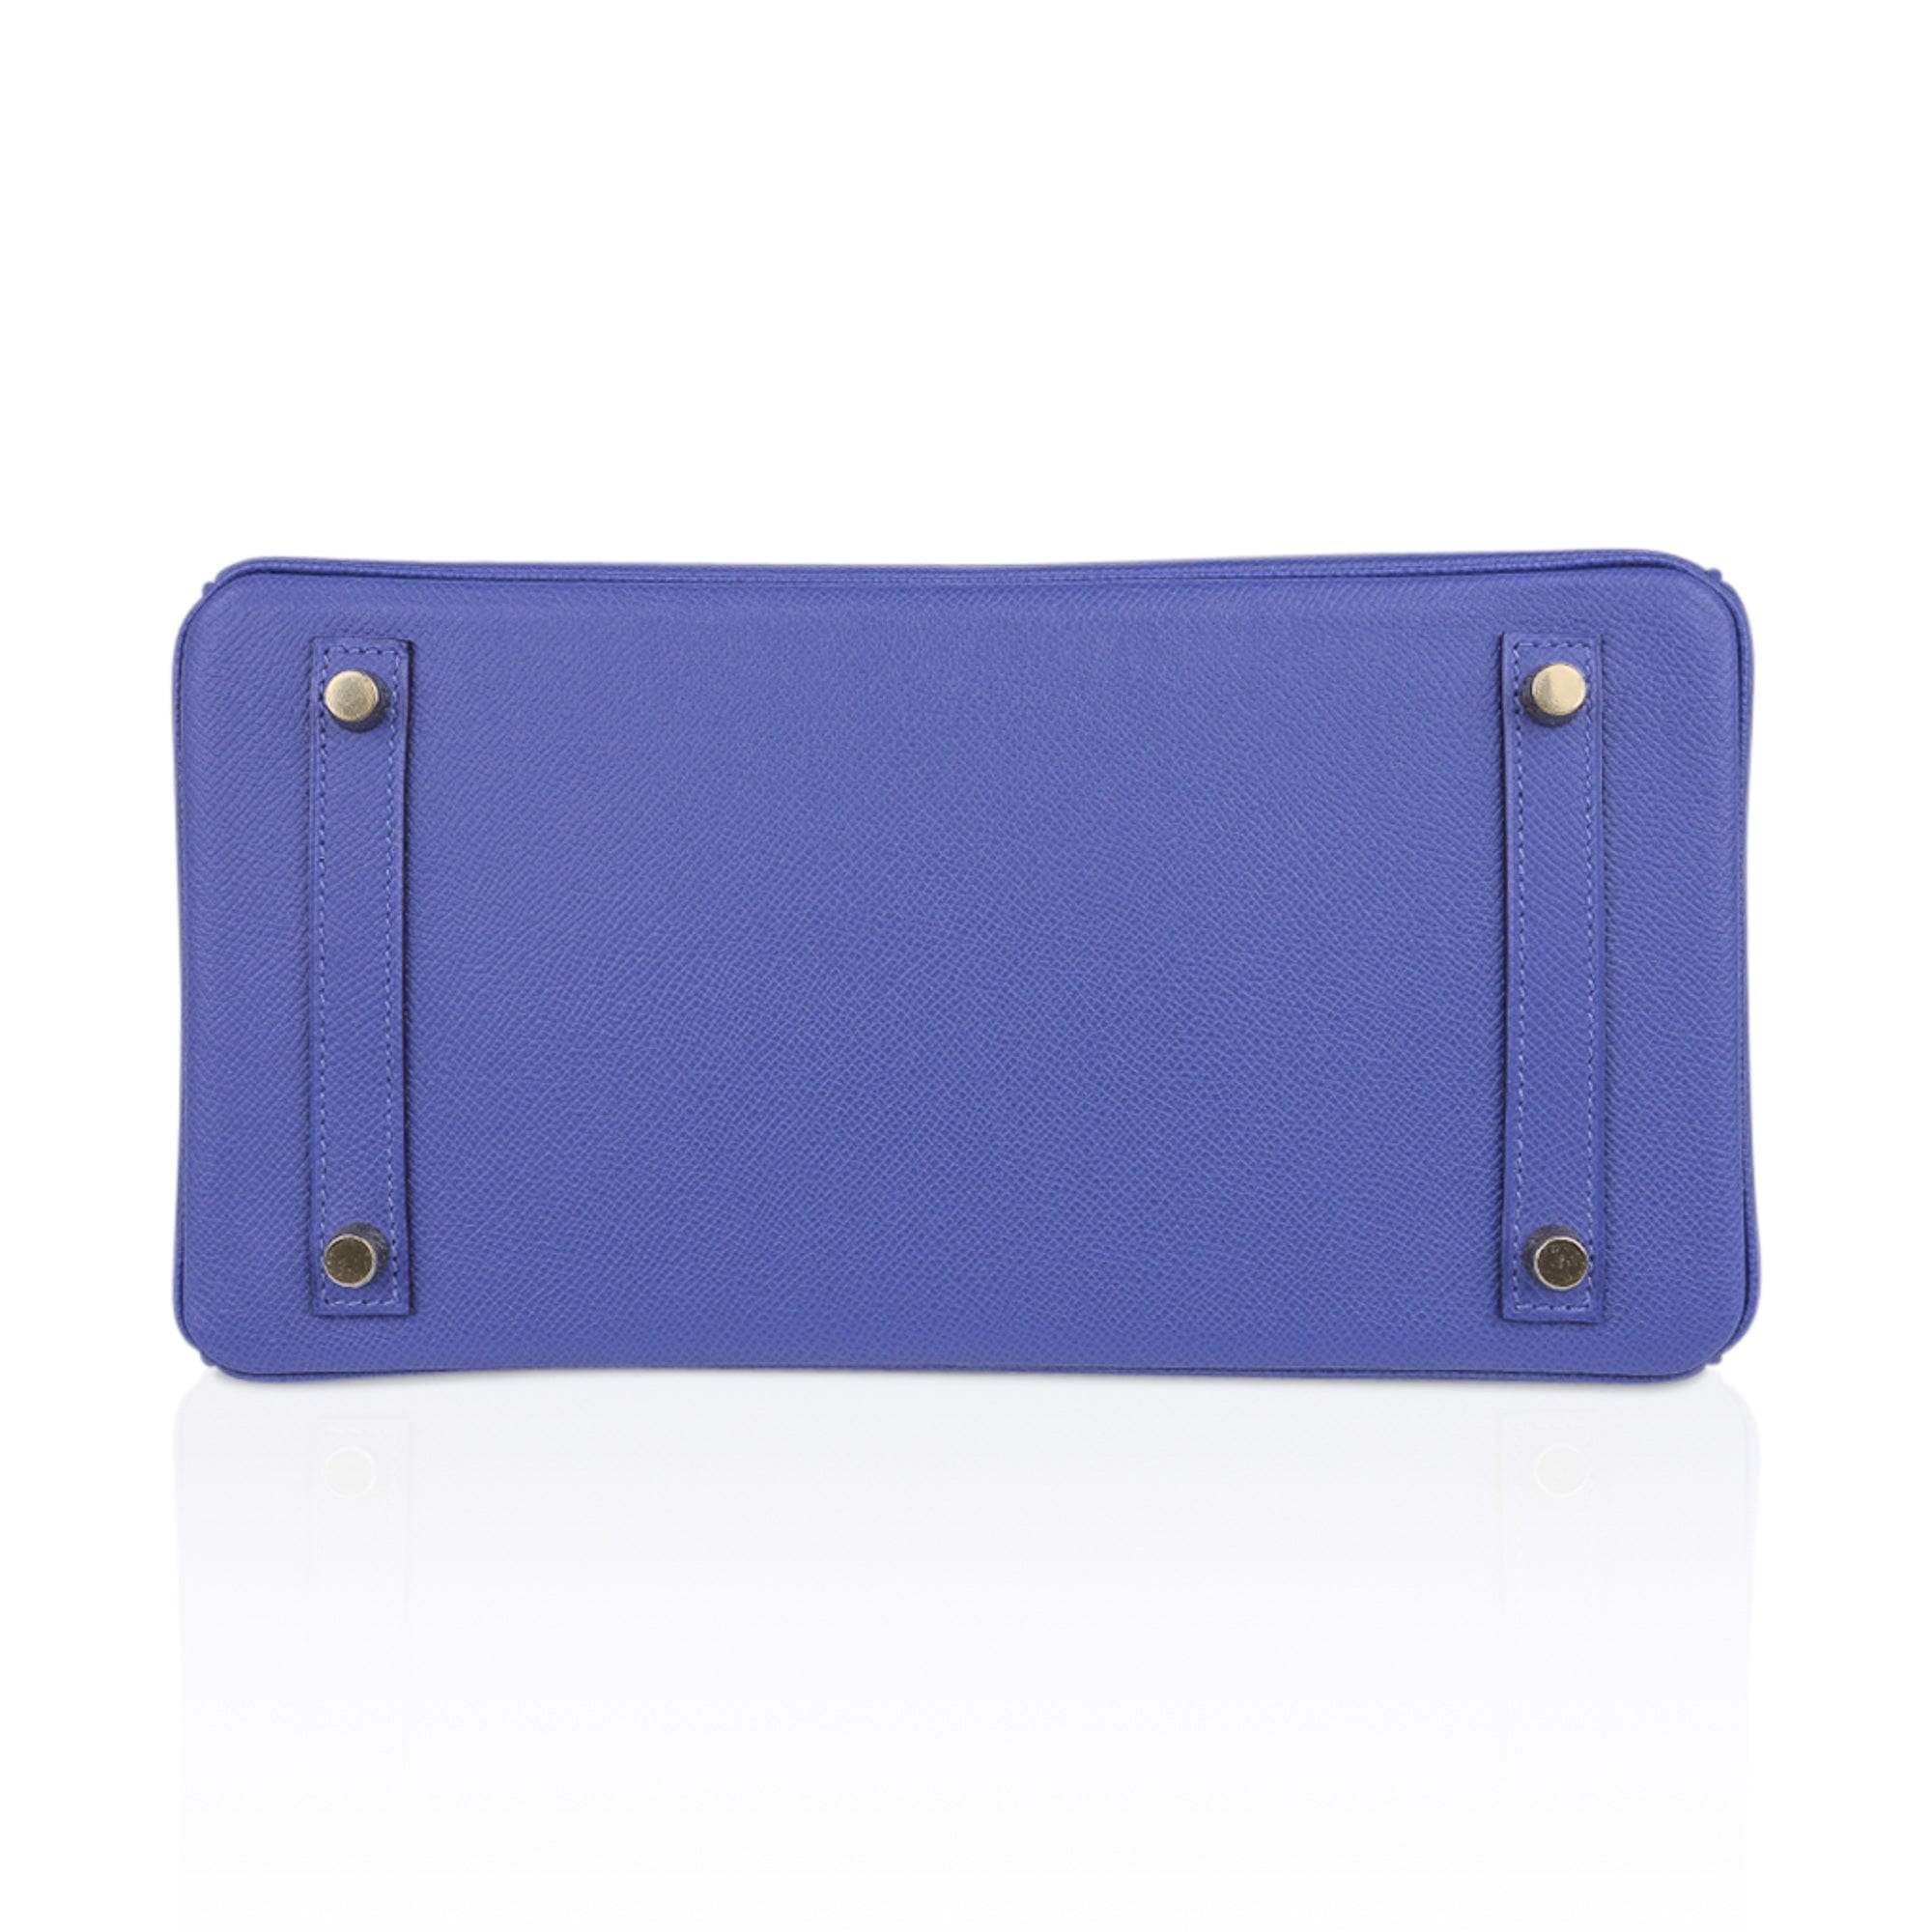 Beautiful Louis Vuitton Capucines wallet with blue and lilac